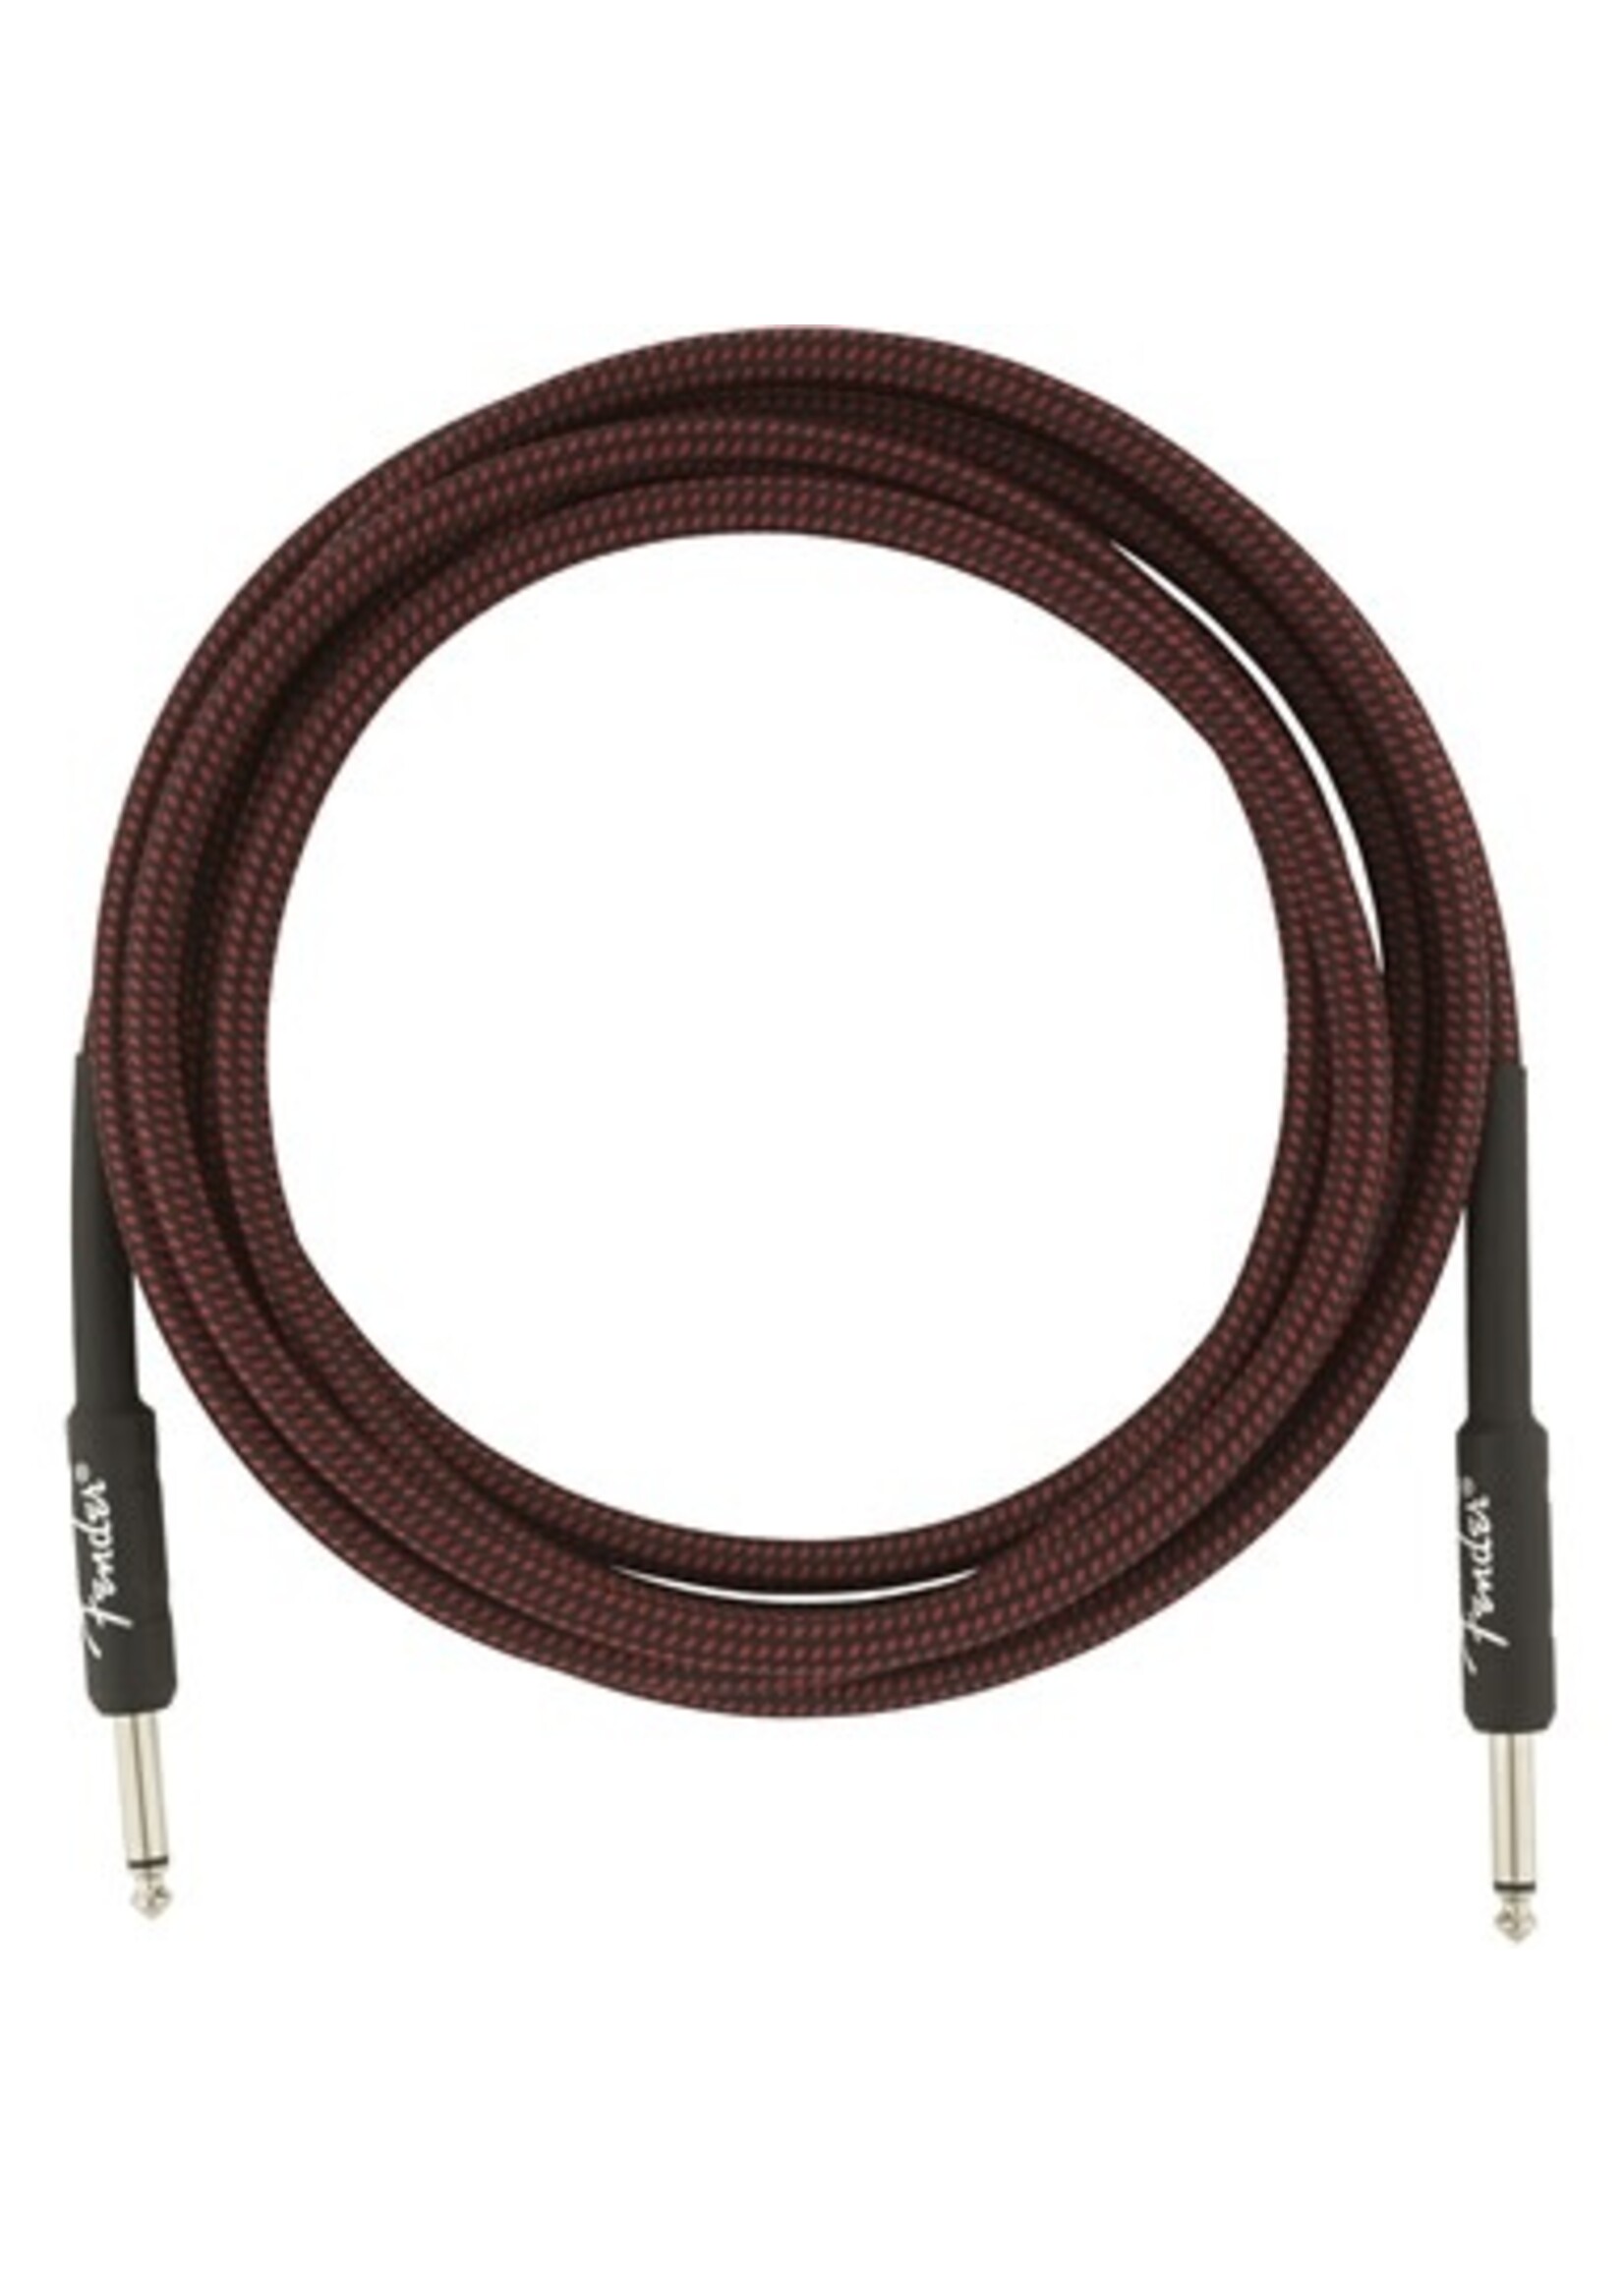 Fender Fender 0990820068 Professional Series Instrument Cable, 18.6', Gray Tweed